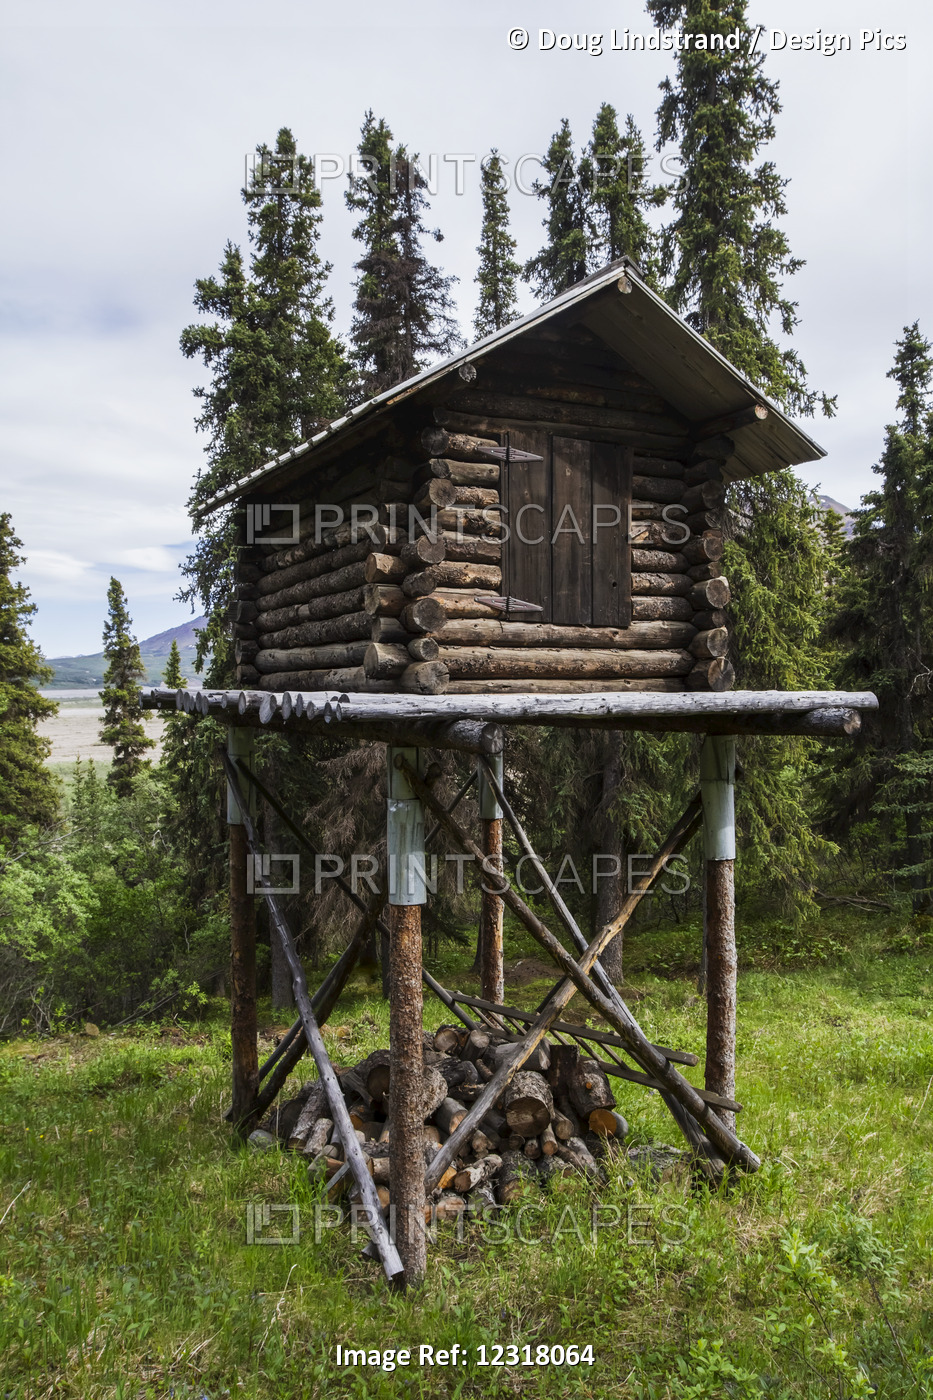 A Cache In Denali National Park Near An Old Cabin That Is Occupied During The ...